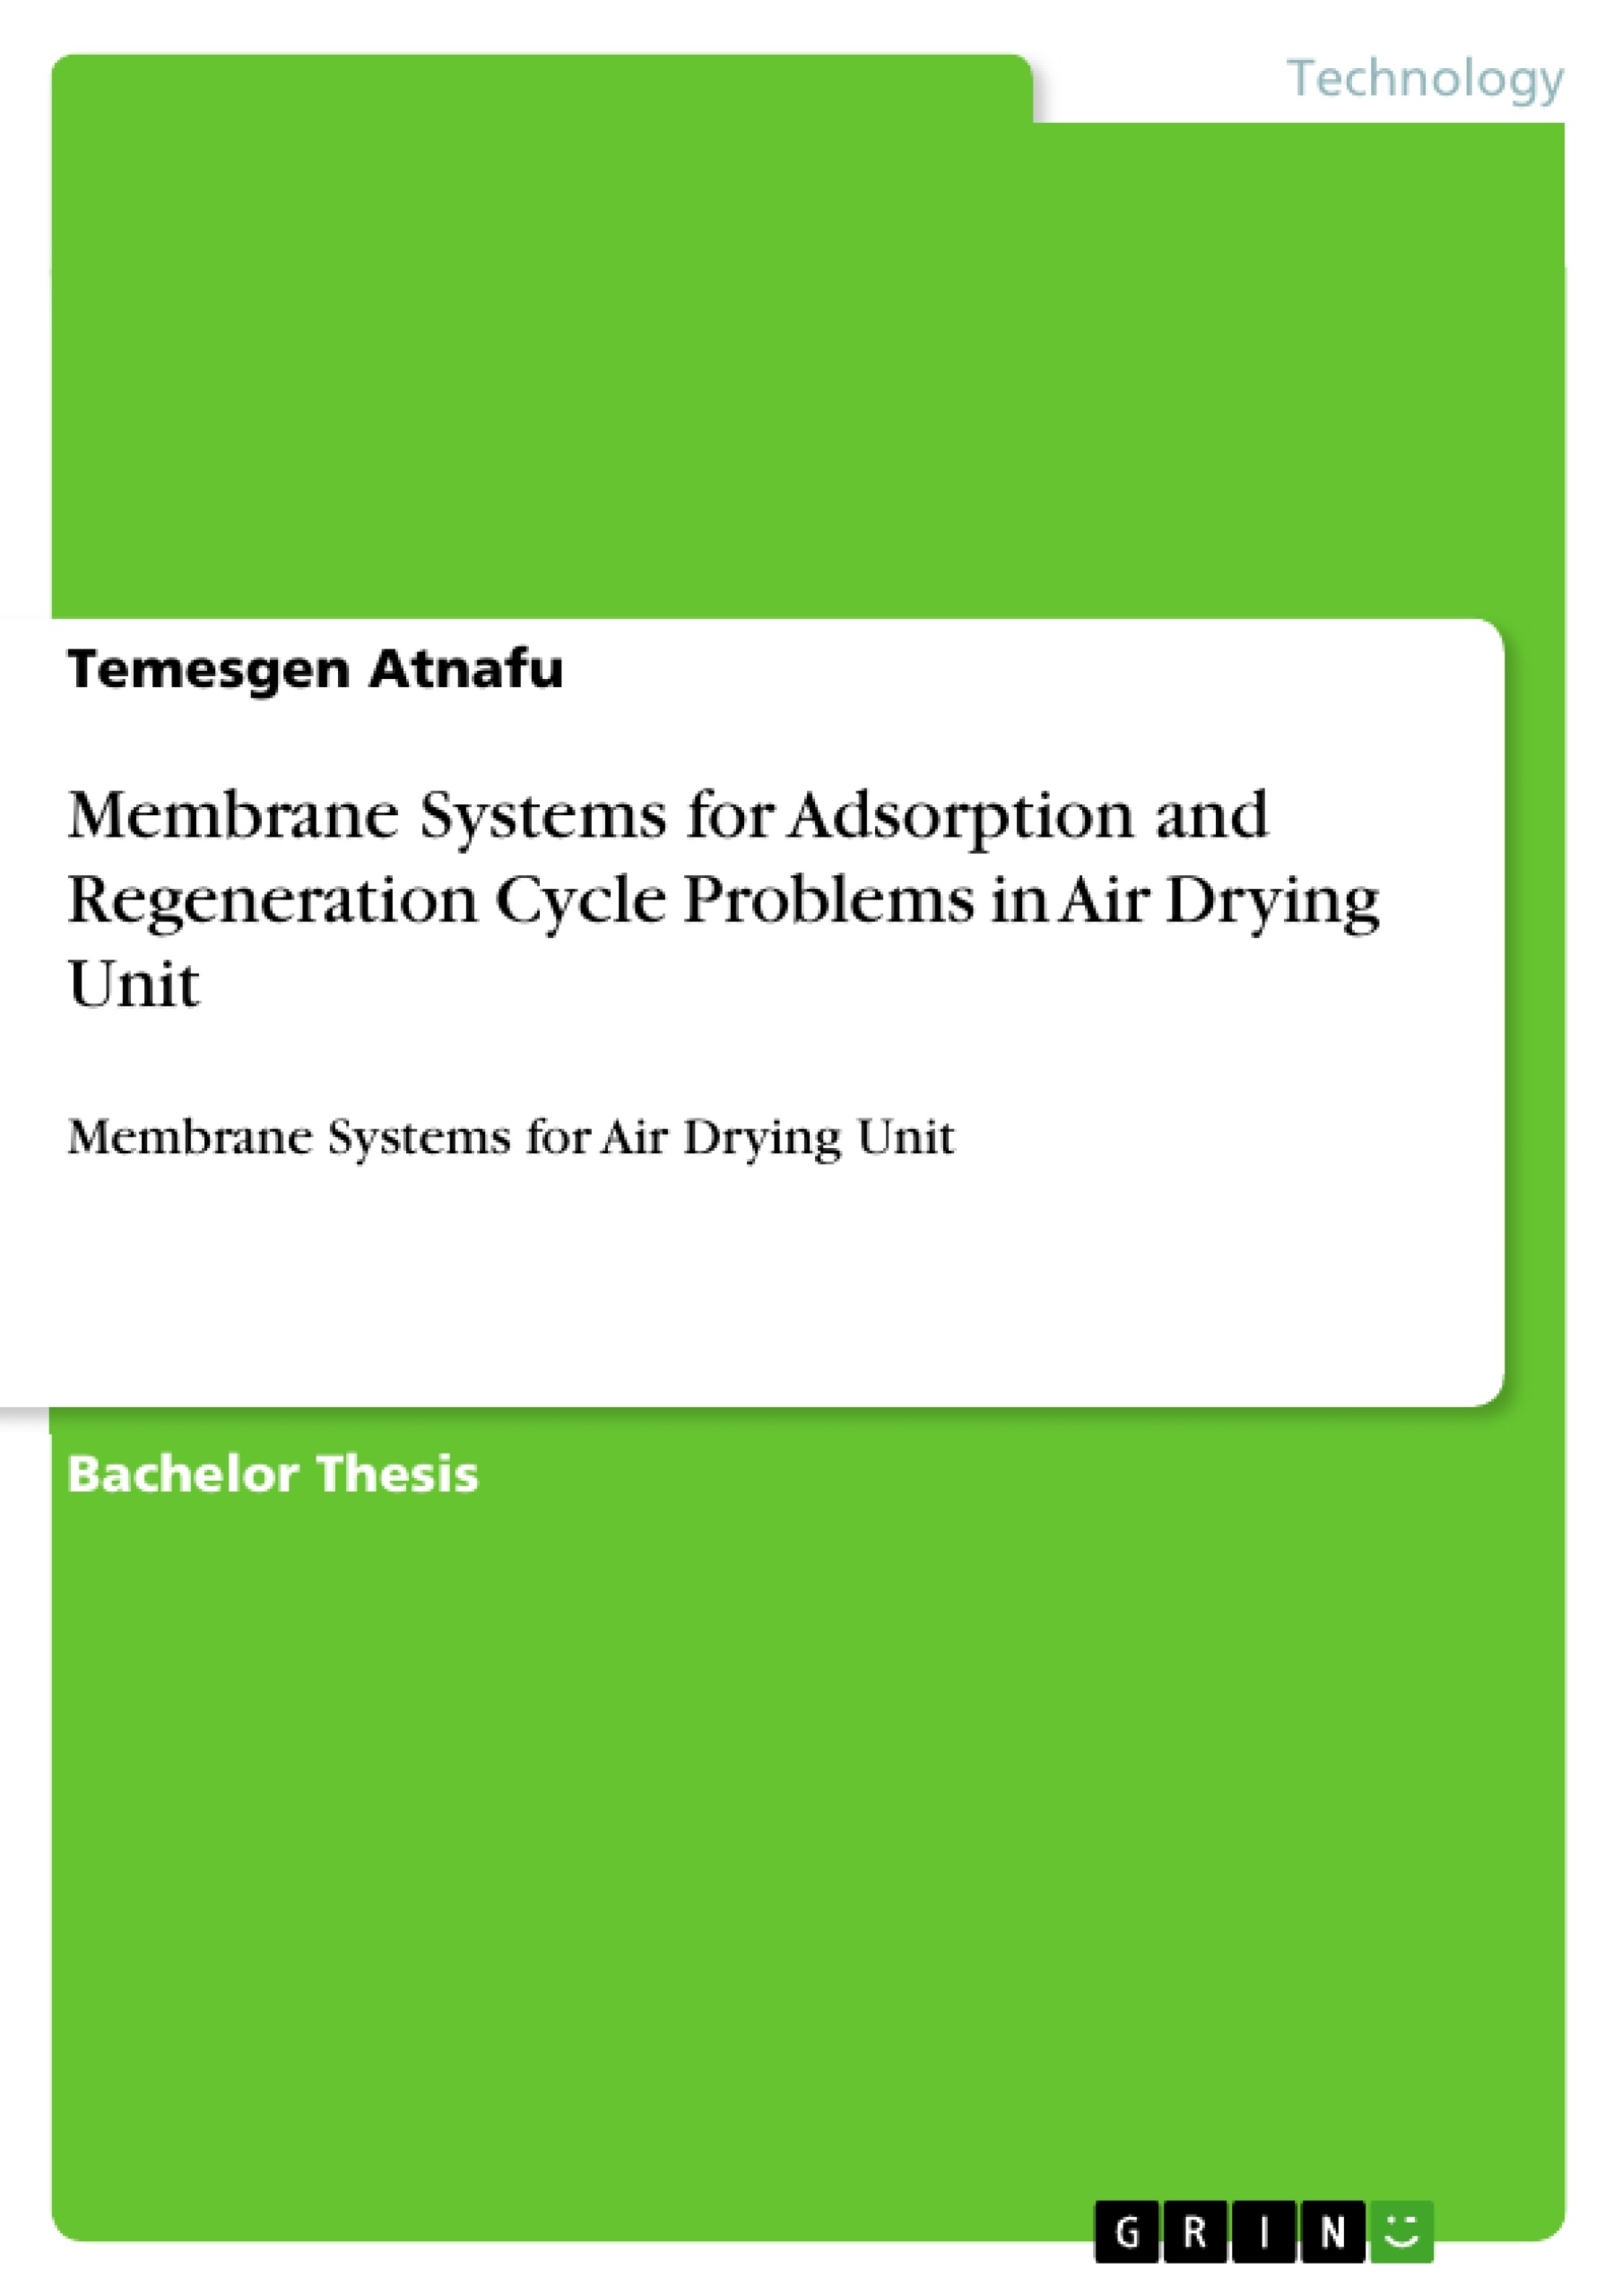 Título: Membrane Systems for Adsorption and Regeneration Cycle Problems in Air Drying Unit  